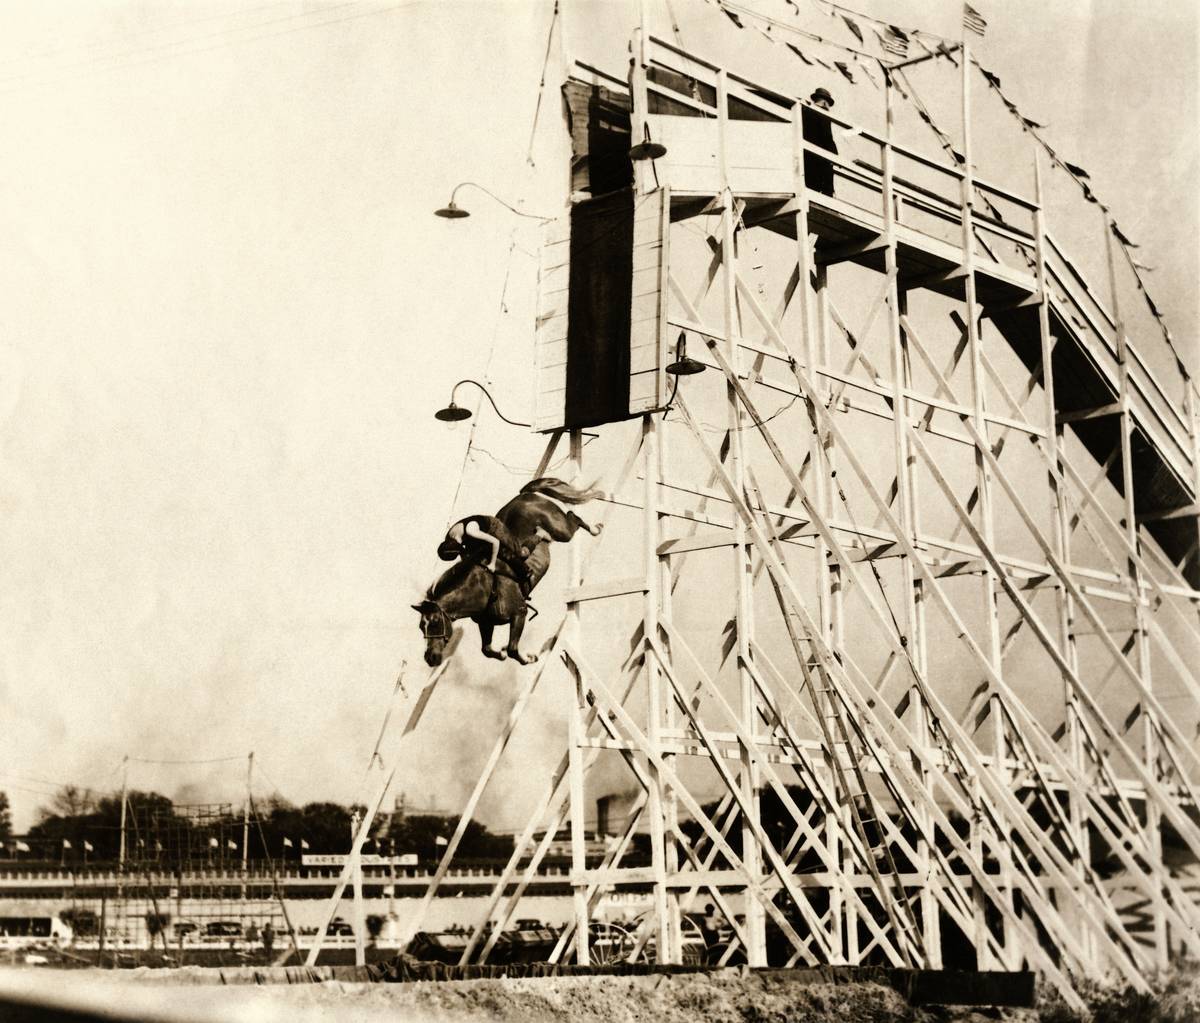 <p>These folks are gathered around to witness Eunice Winkless perform horse diving. In 1905, Winkless performed this stunt for a Fourth of July event. </p> <p>The stunt woman dove from a 50-foot-high tower into a small pool while on horseback.</p> <p><a href="https://www.msn.com/en-us/community/channel/vid-rm8gb6502735hjr5kwws5apergf2ehaxhx4n7c4eyc5yhkkkapya?item=flights%3Aprg-tipsubsc-v1a&ocid=windirect&cvid=89e366c9b4094002b65f4a70a655c93d" rel="noopener noreferrer">Follow us for more great content</a></p>